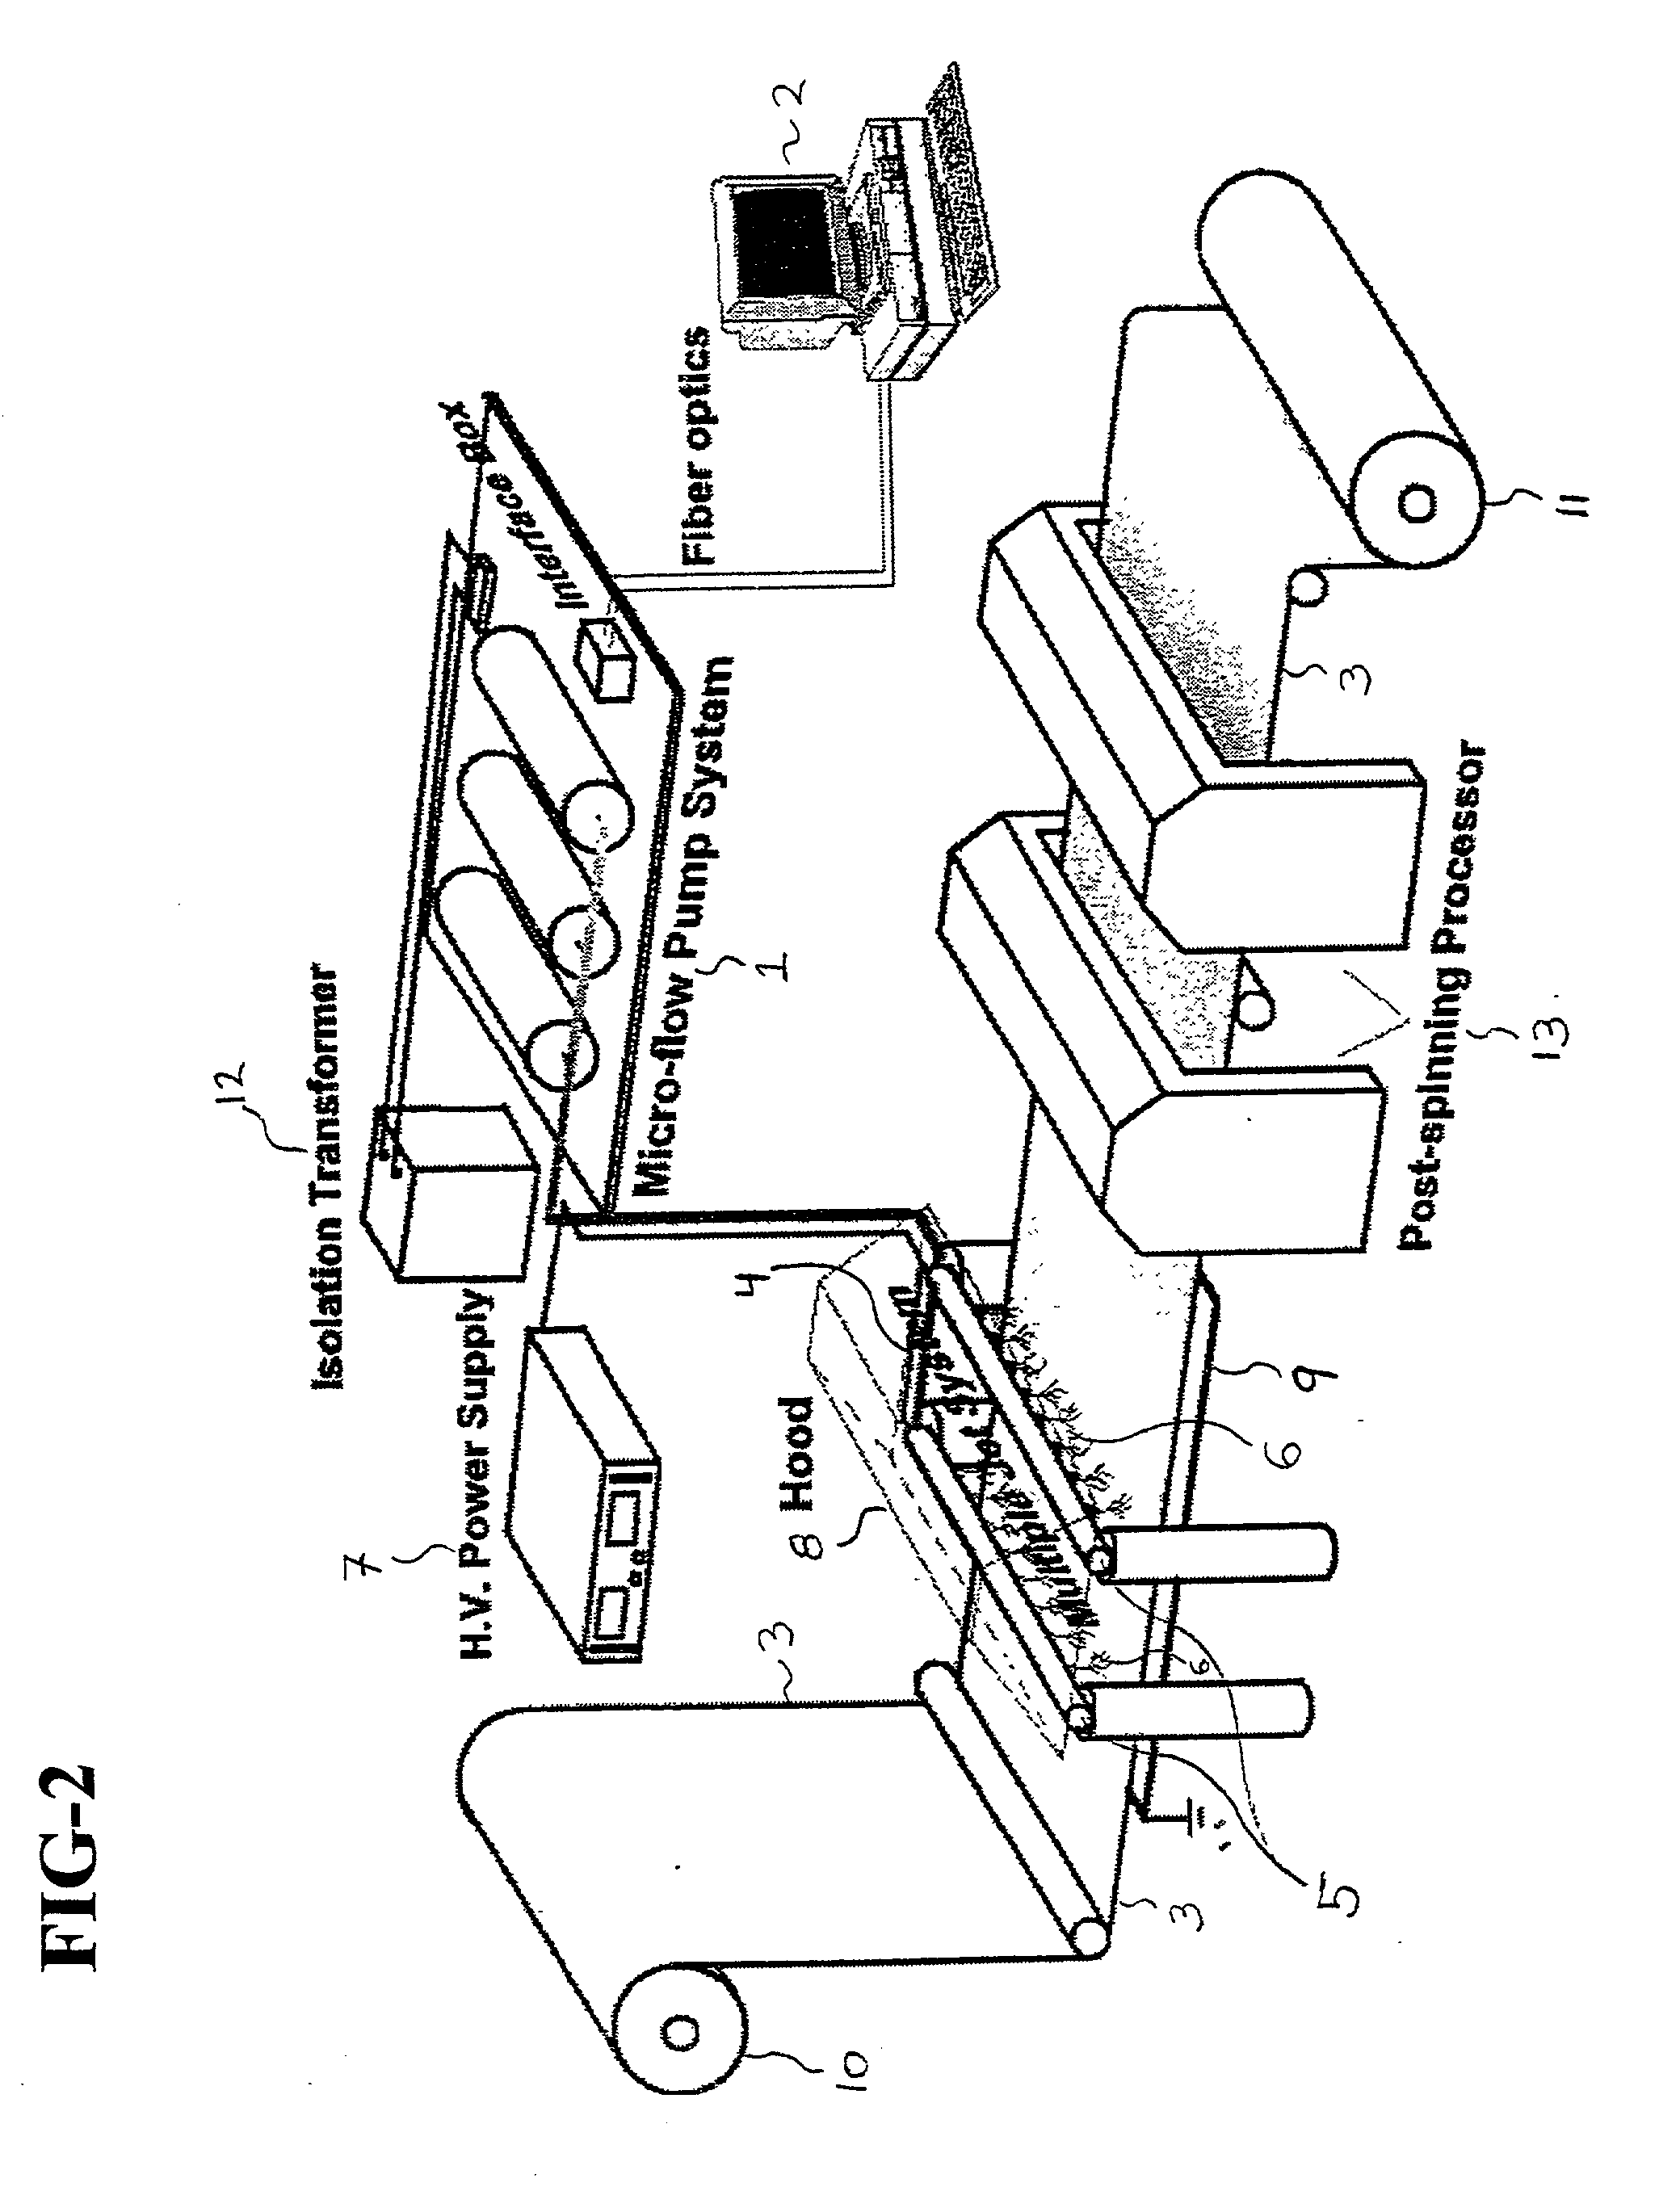 Cell storage and delivery system